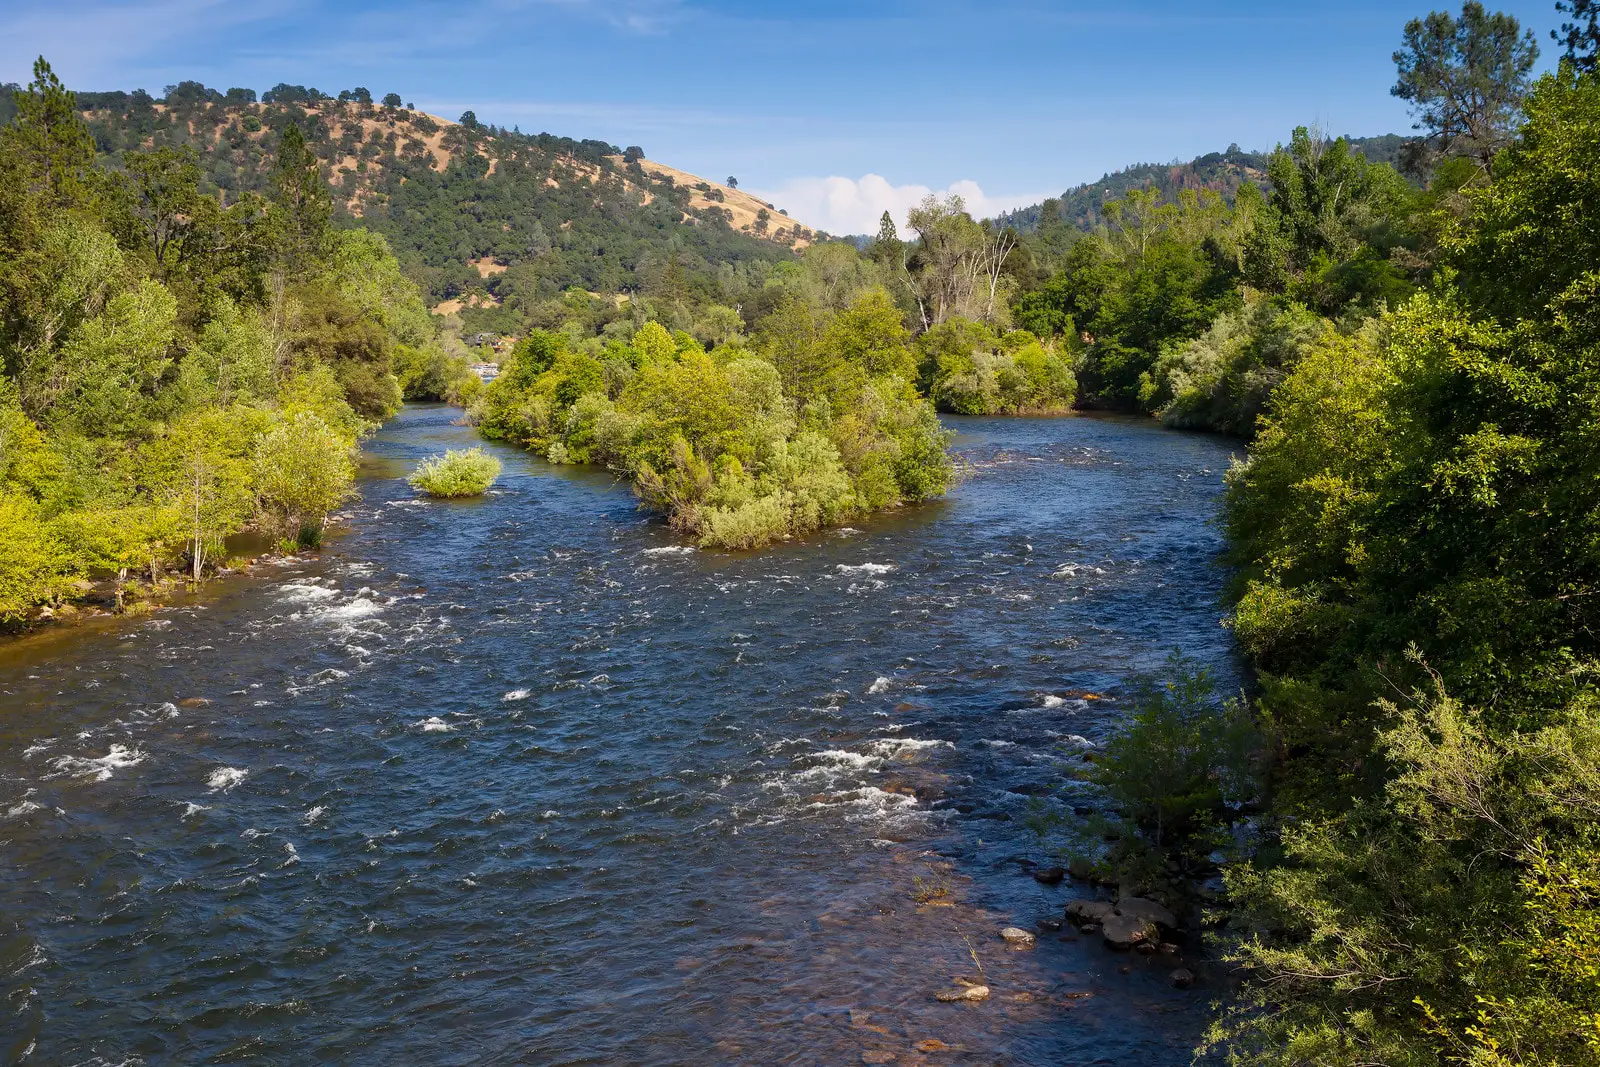 South Fork of the American River near Marshall Gold Discovery State Historic Park. A popular place to pan for gold.